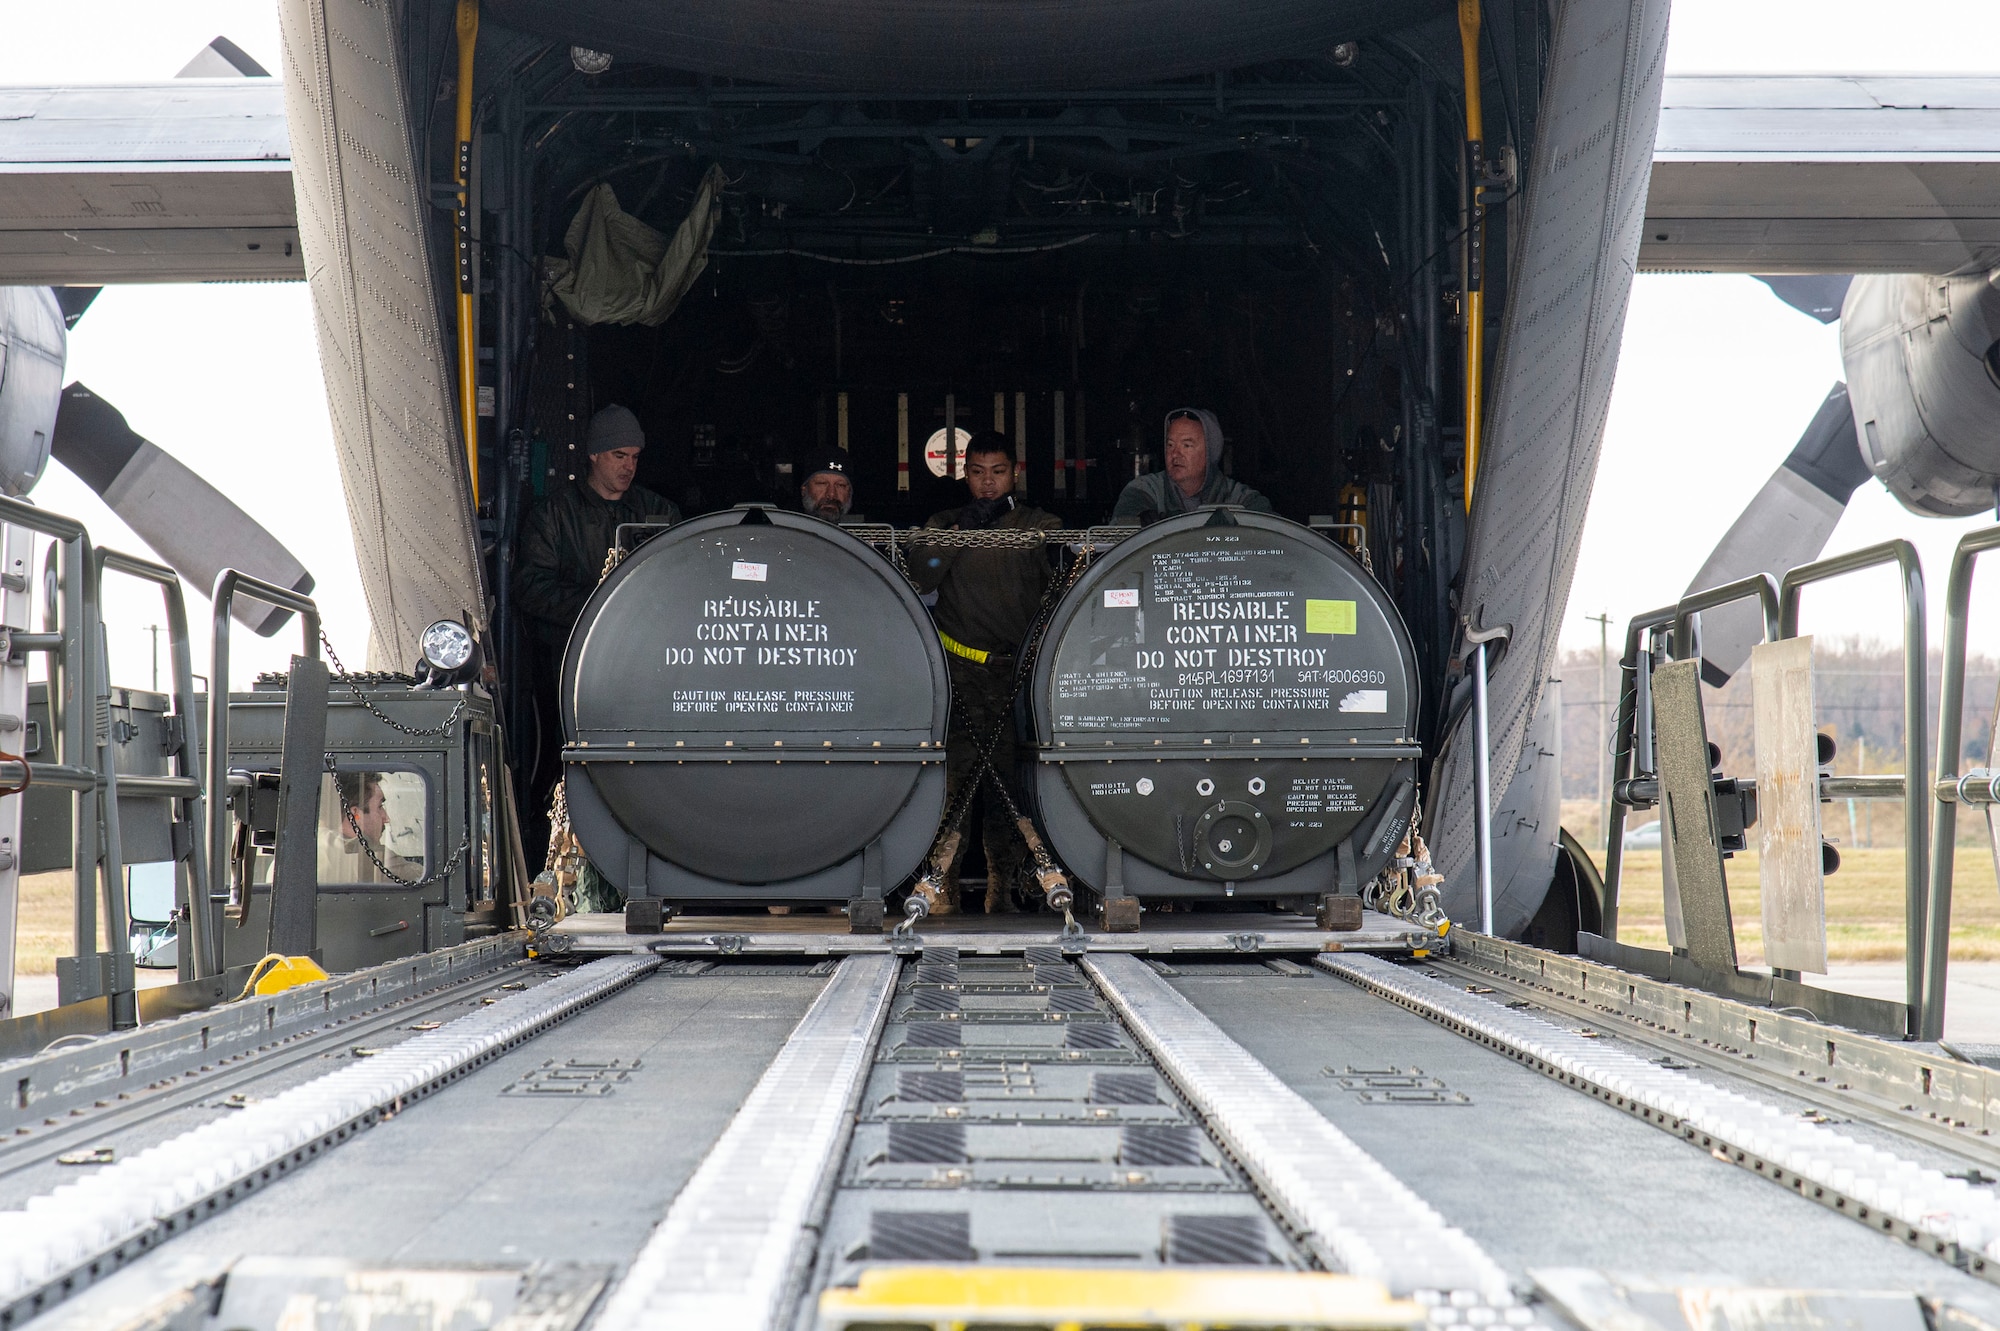 Airmen from the 436th Aerial Port Squadron push pallets onto a cargo loader during the unloading of a Polish air force C-130E Hercules Dec. 7, 2021, at Dover Air Force Base, Delaware, as part of a foreign military sales mission. The United States and Poland have enjoyed decades-long warm bilateral relations. Poland is a stalwart NATO ally, and both the U.S. and Poland remain committed to the regional security and prosperity of Europe. Due to its strategic location, Dover AFB supports approximately $3.5 billion worth of foreign military sales annually. (U.S. Air Force photo by Roland Balik)